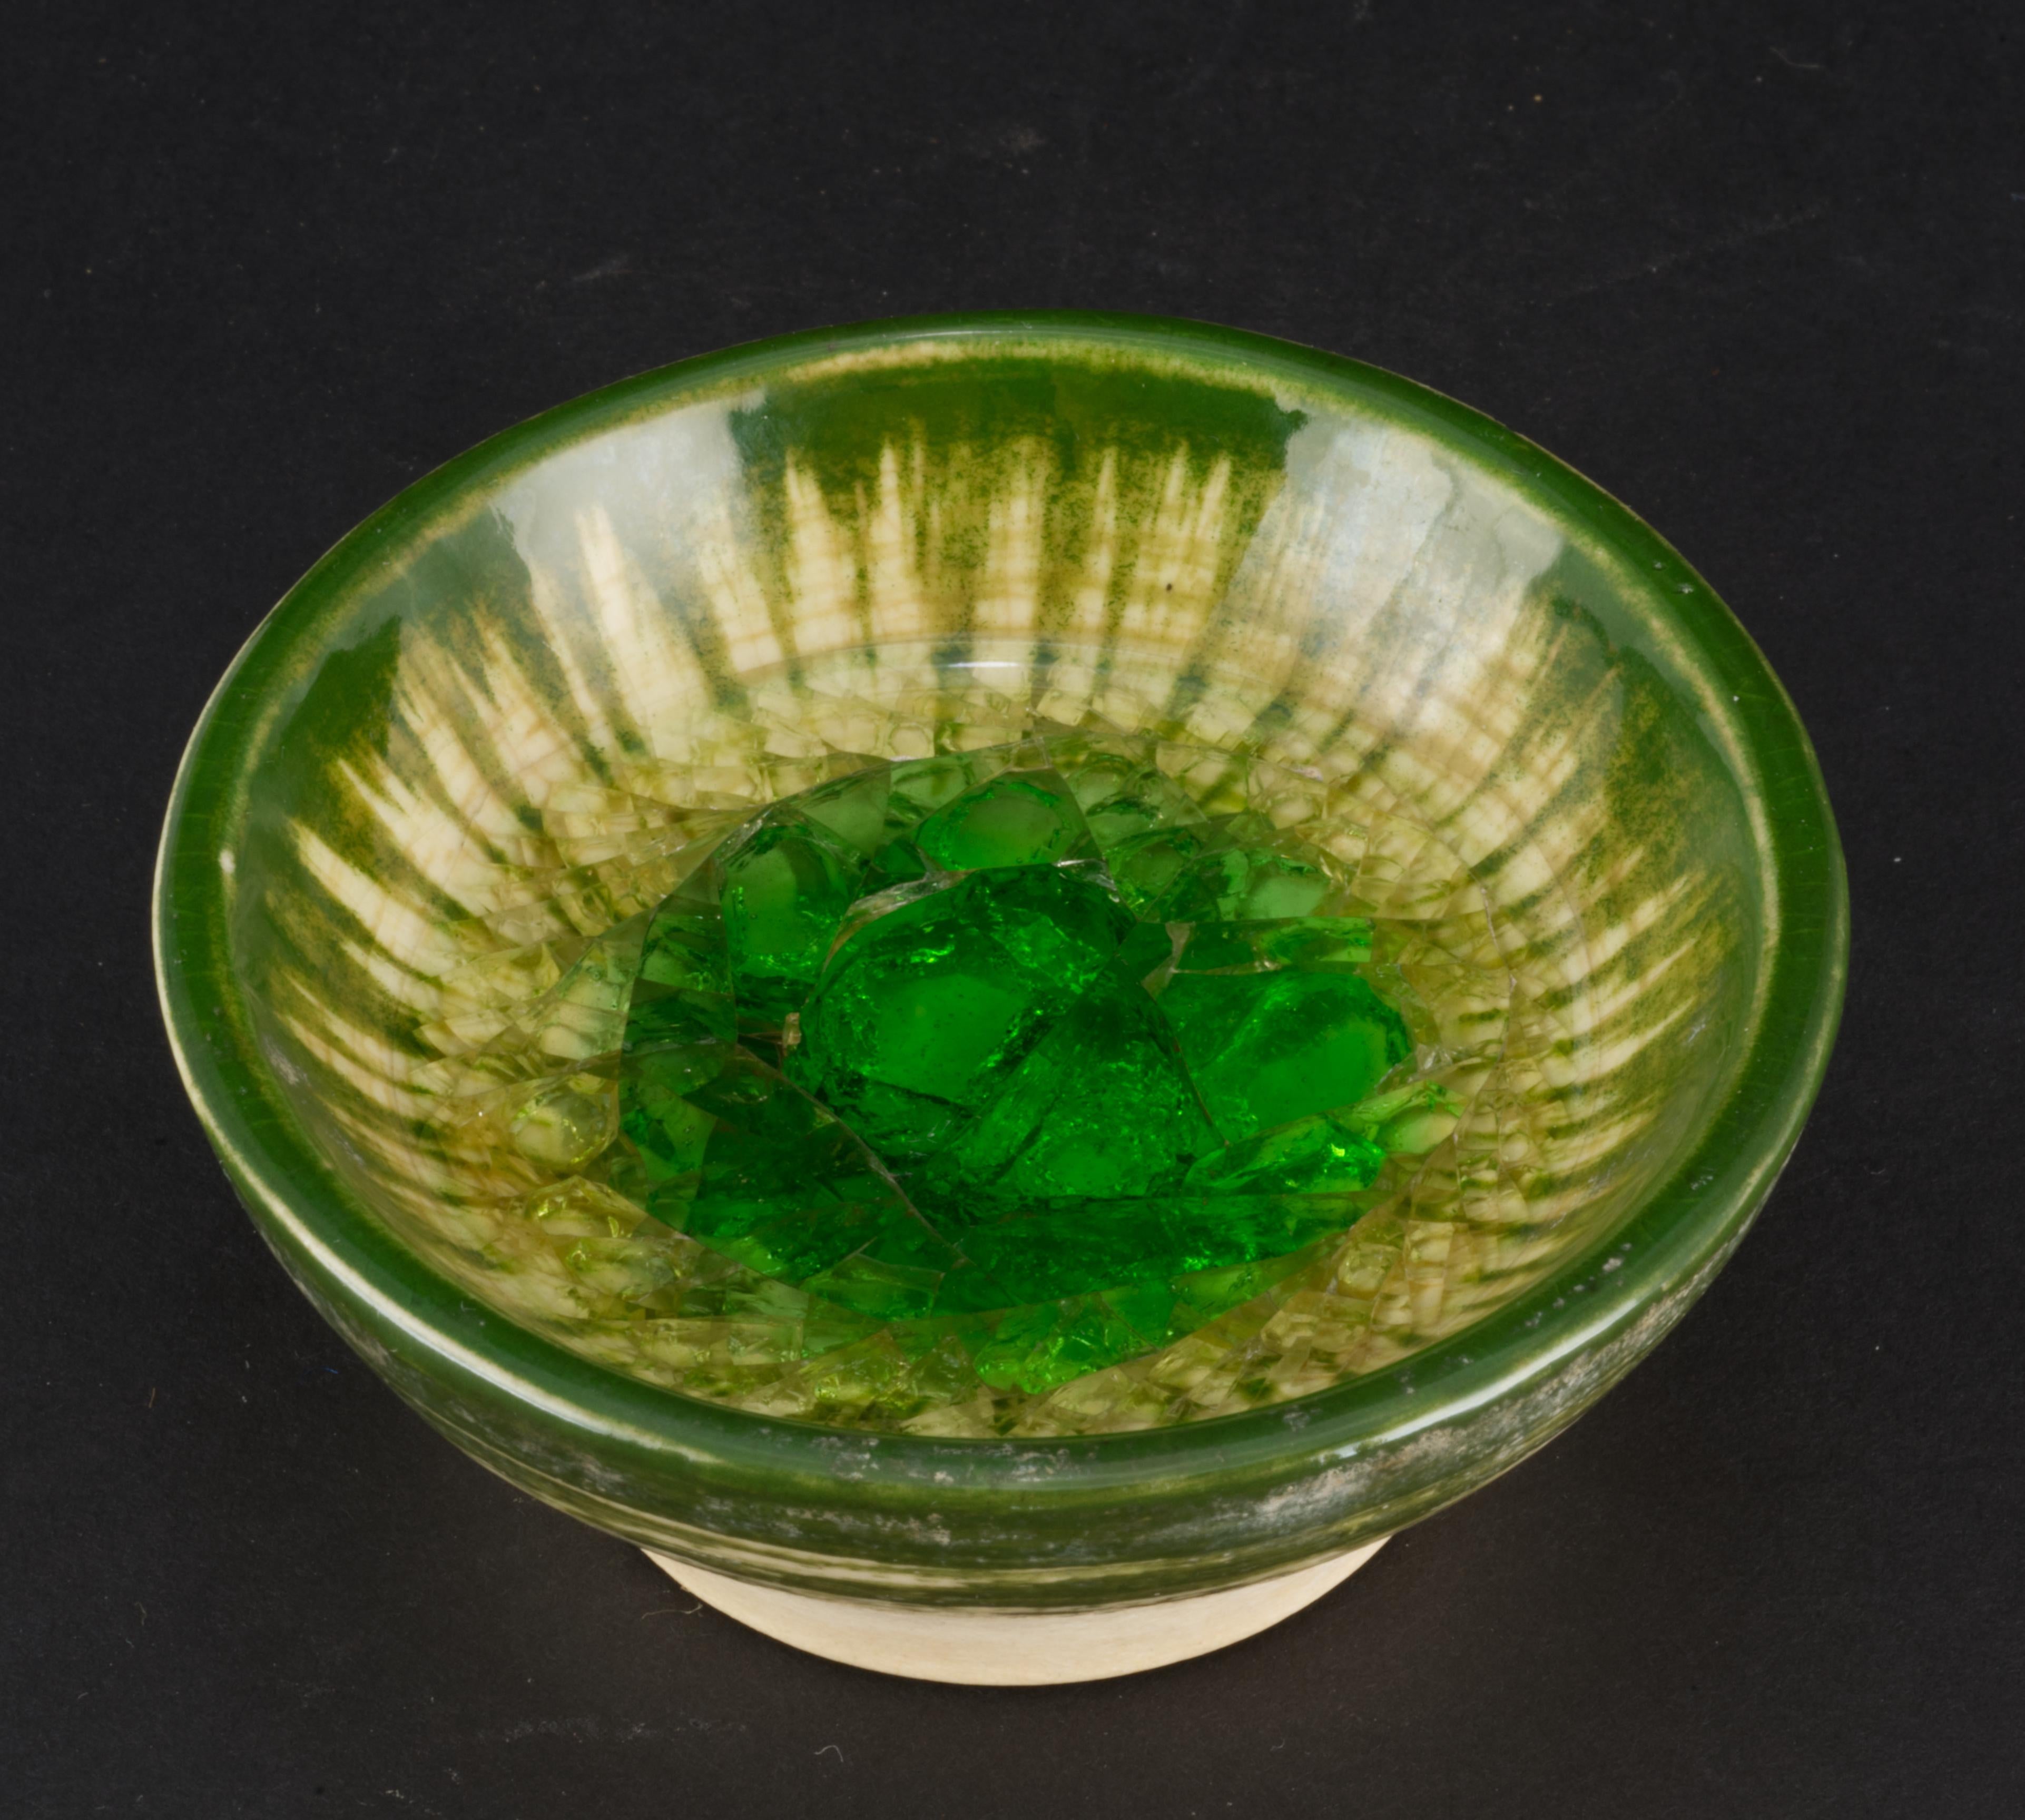 American Waylande Gregory for Dunhill Fused Glass Ceramic Bowl Signed, 1940s Ashtray For Sale